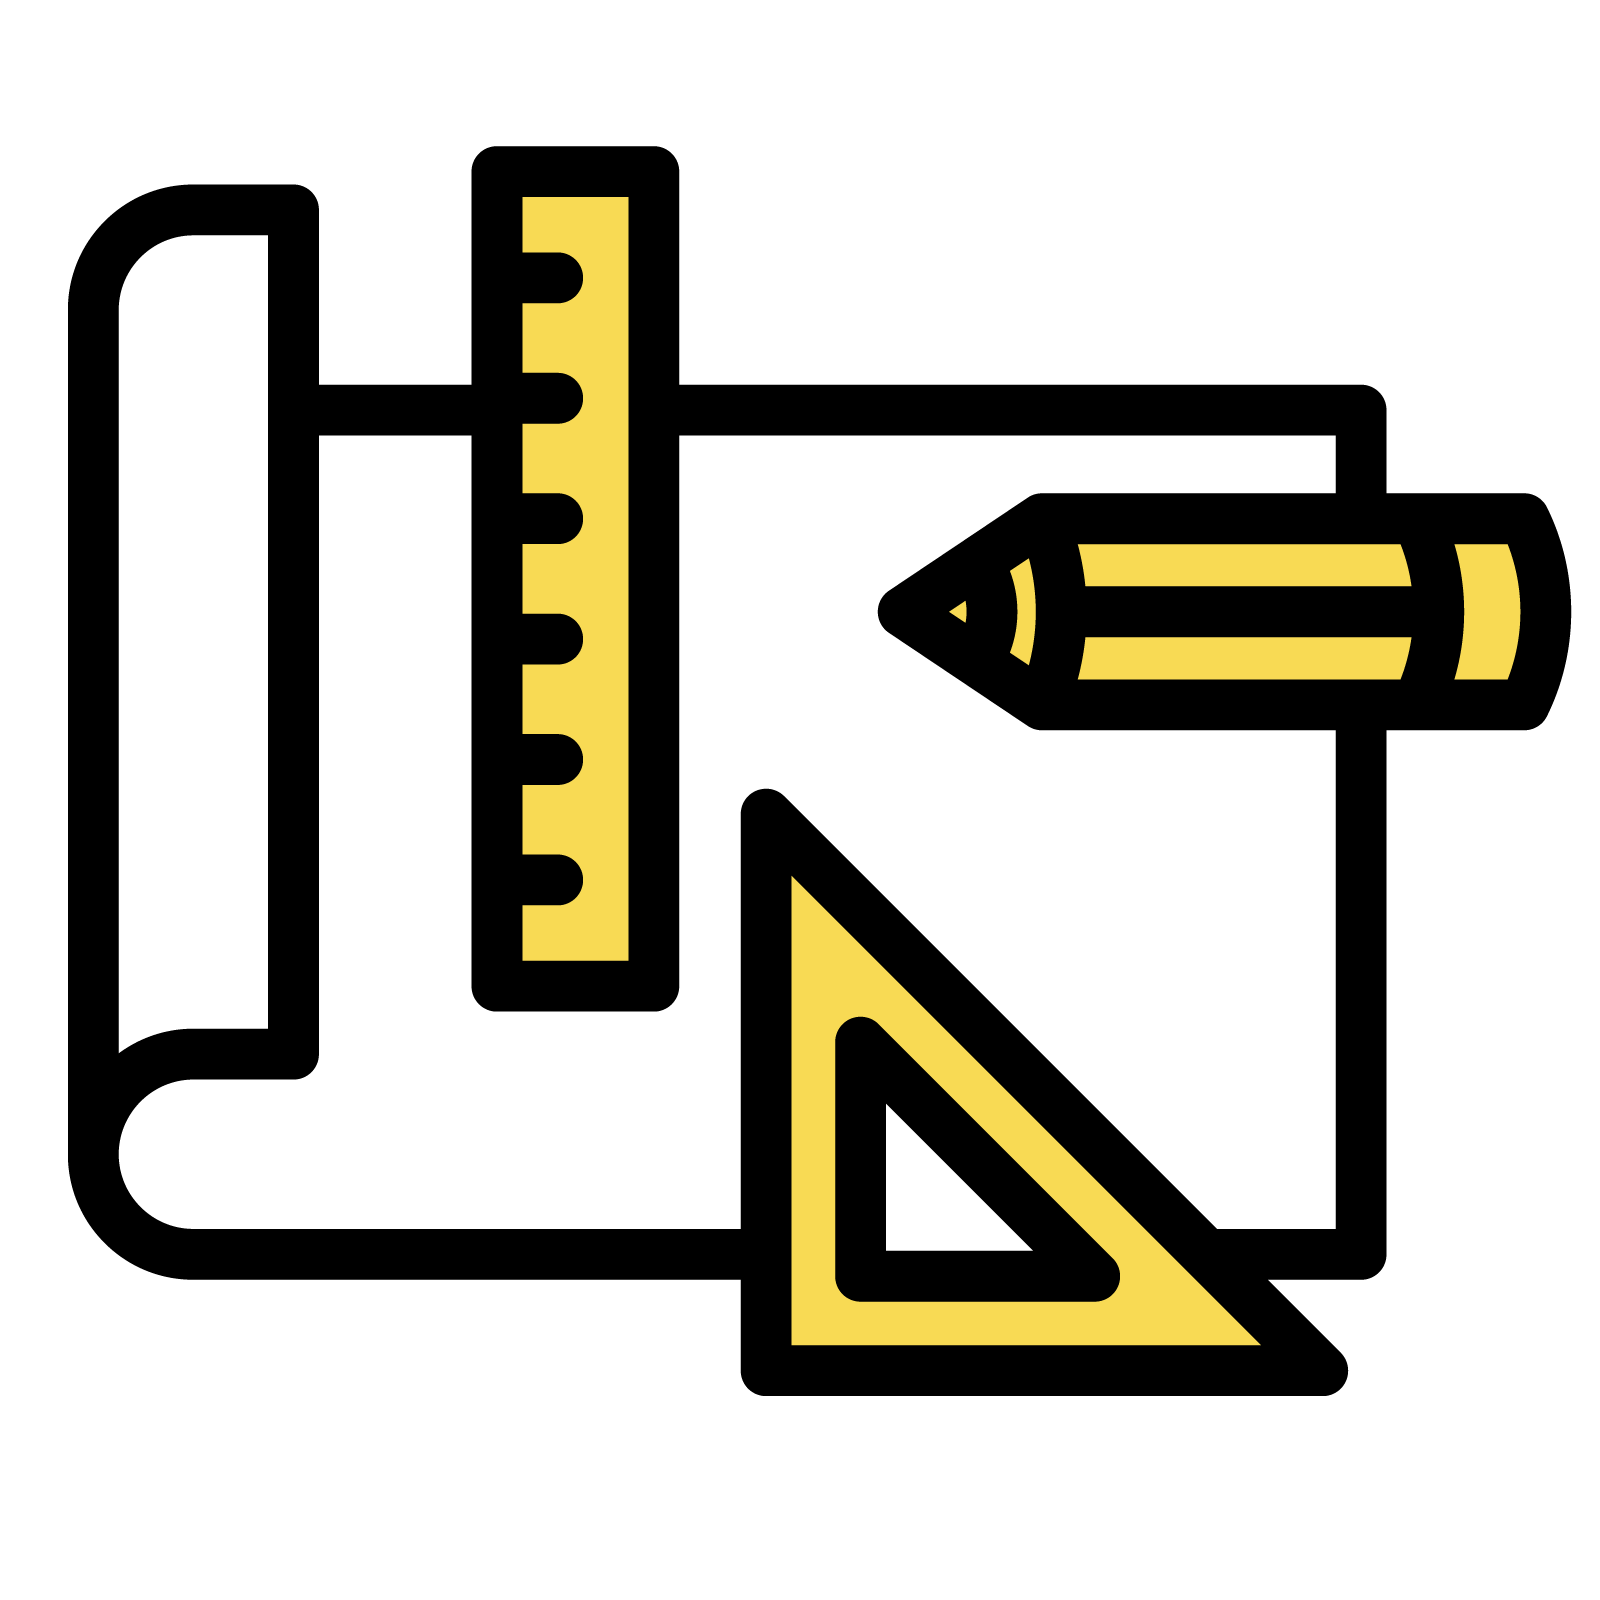 engineer clipart cad